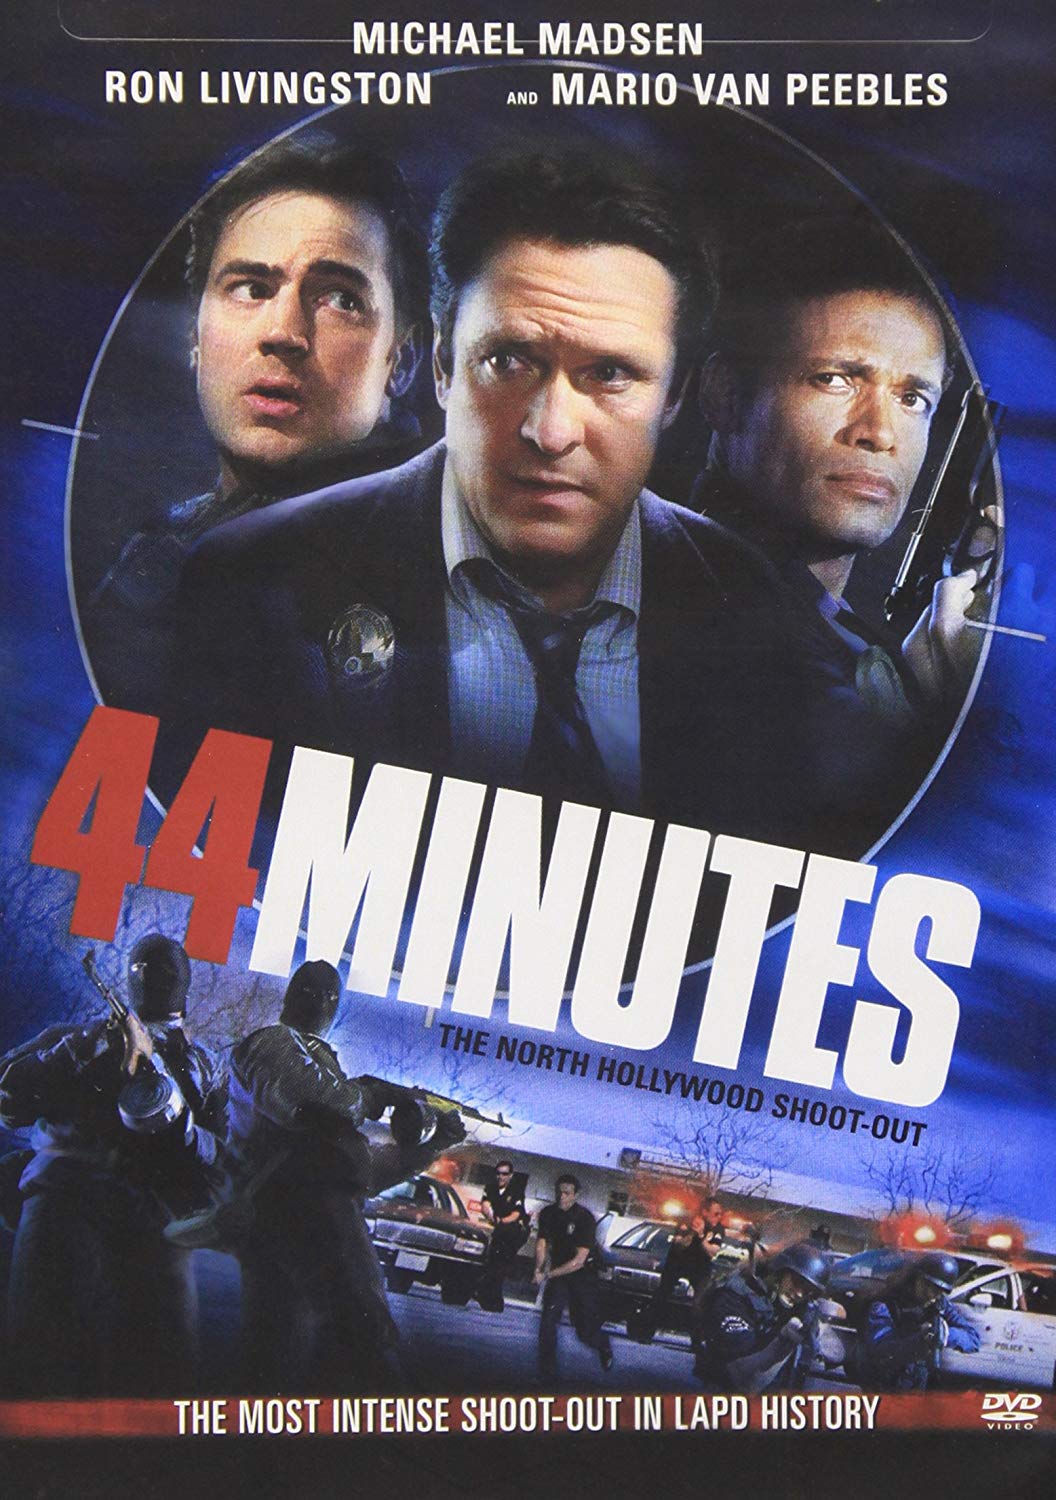 44 минуты / 44 Minutes: The North Hollywood Shoot-Out (2003) DVDRip